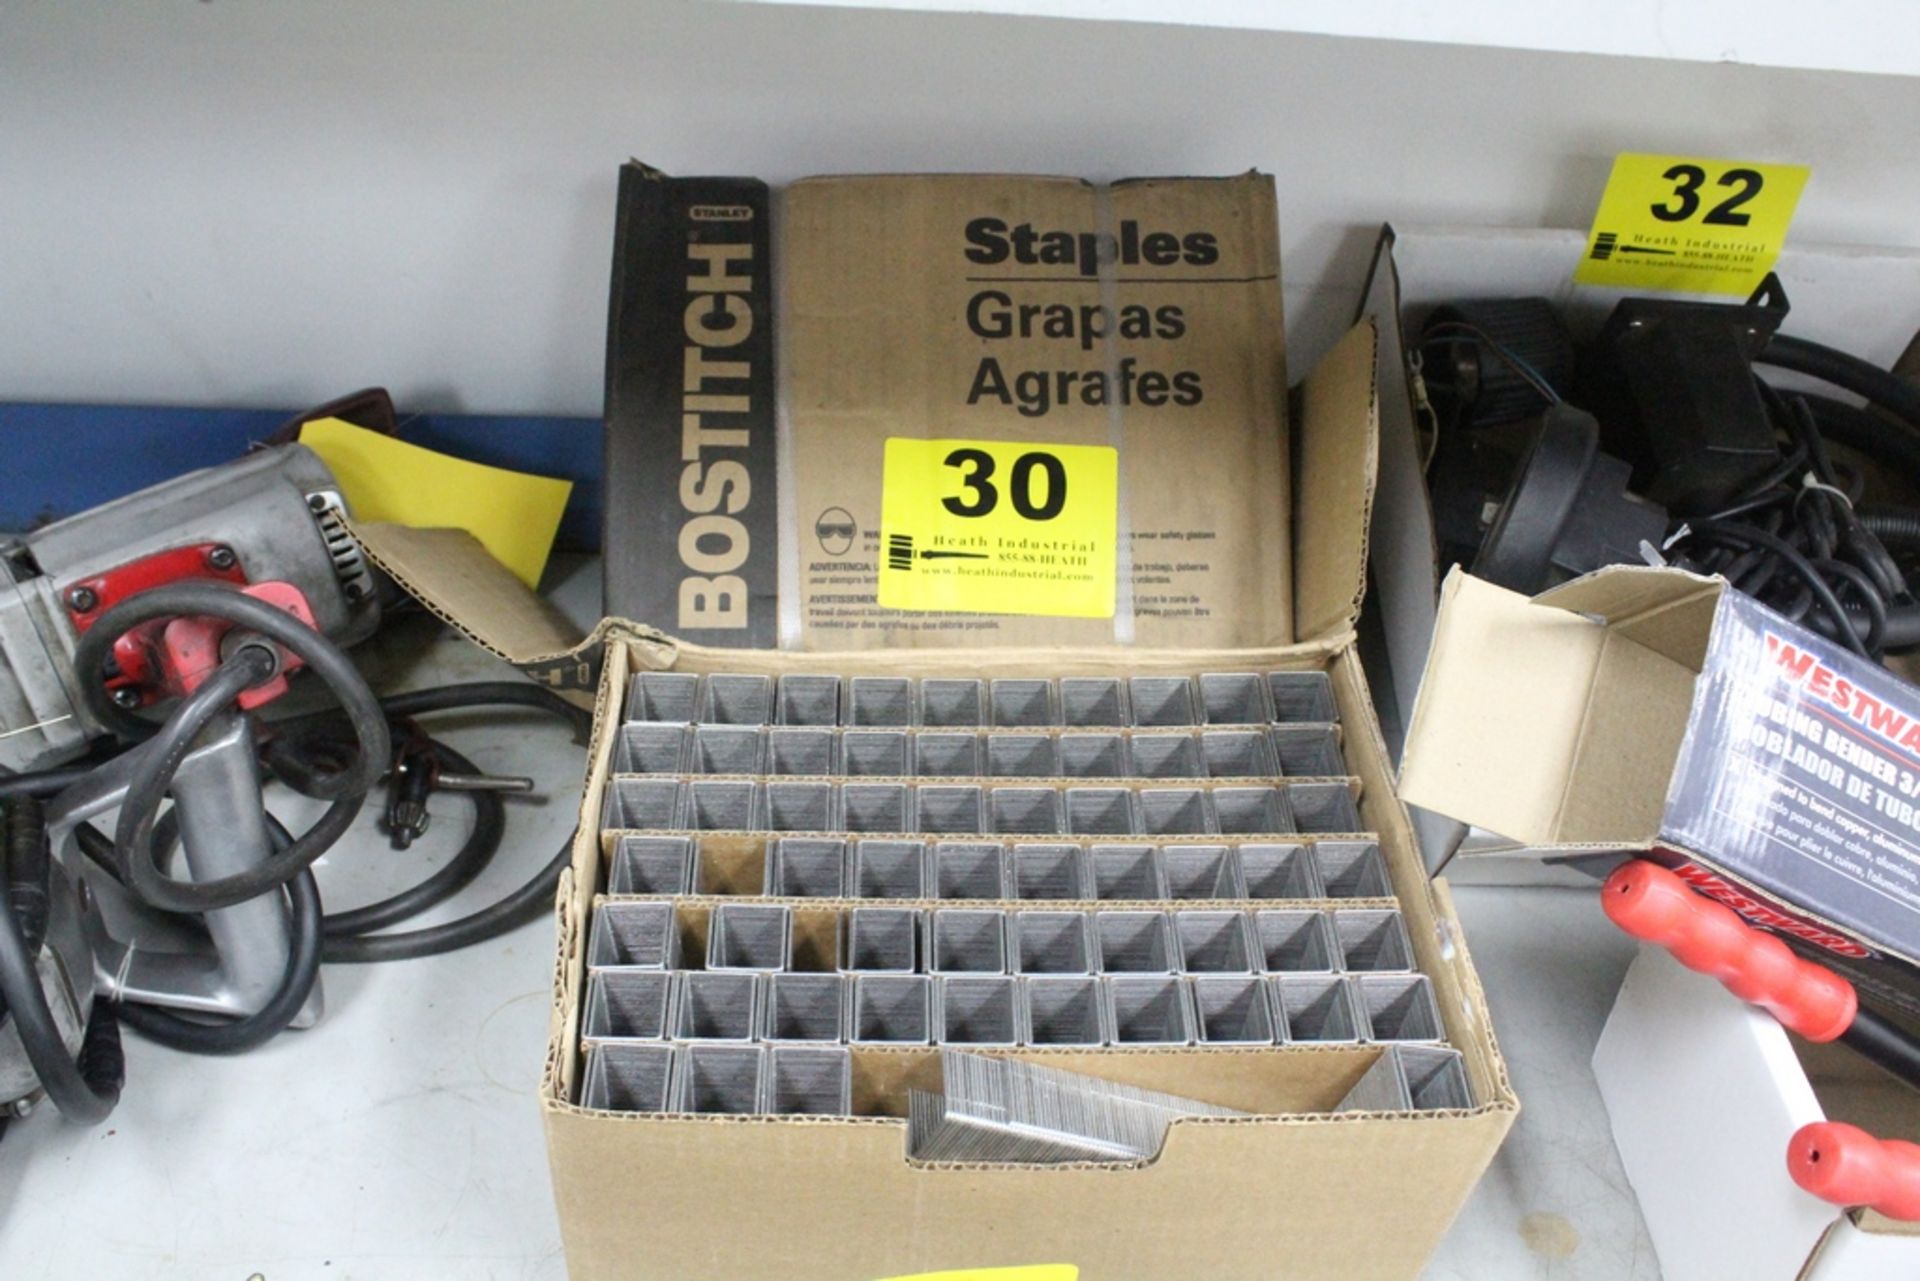 LOT: BOSTITCH 16S2-25 STAPLES IN (2) BOXES